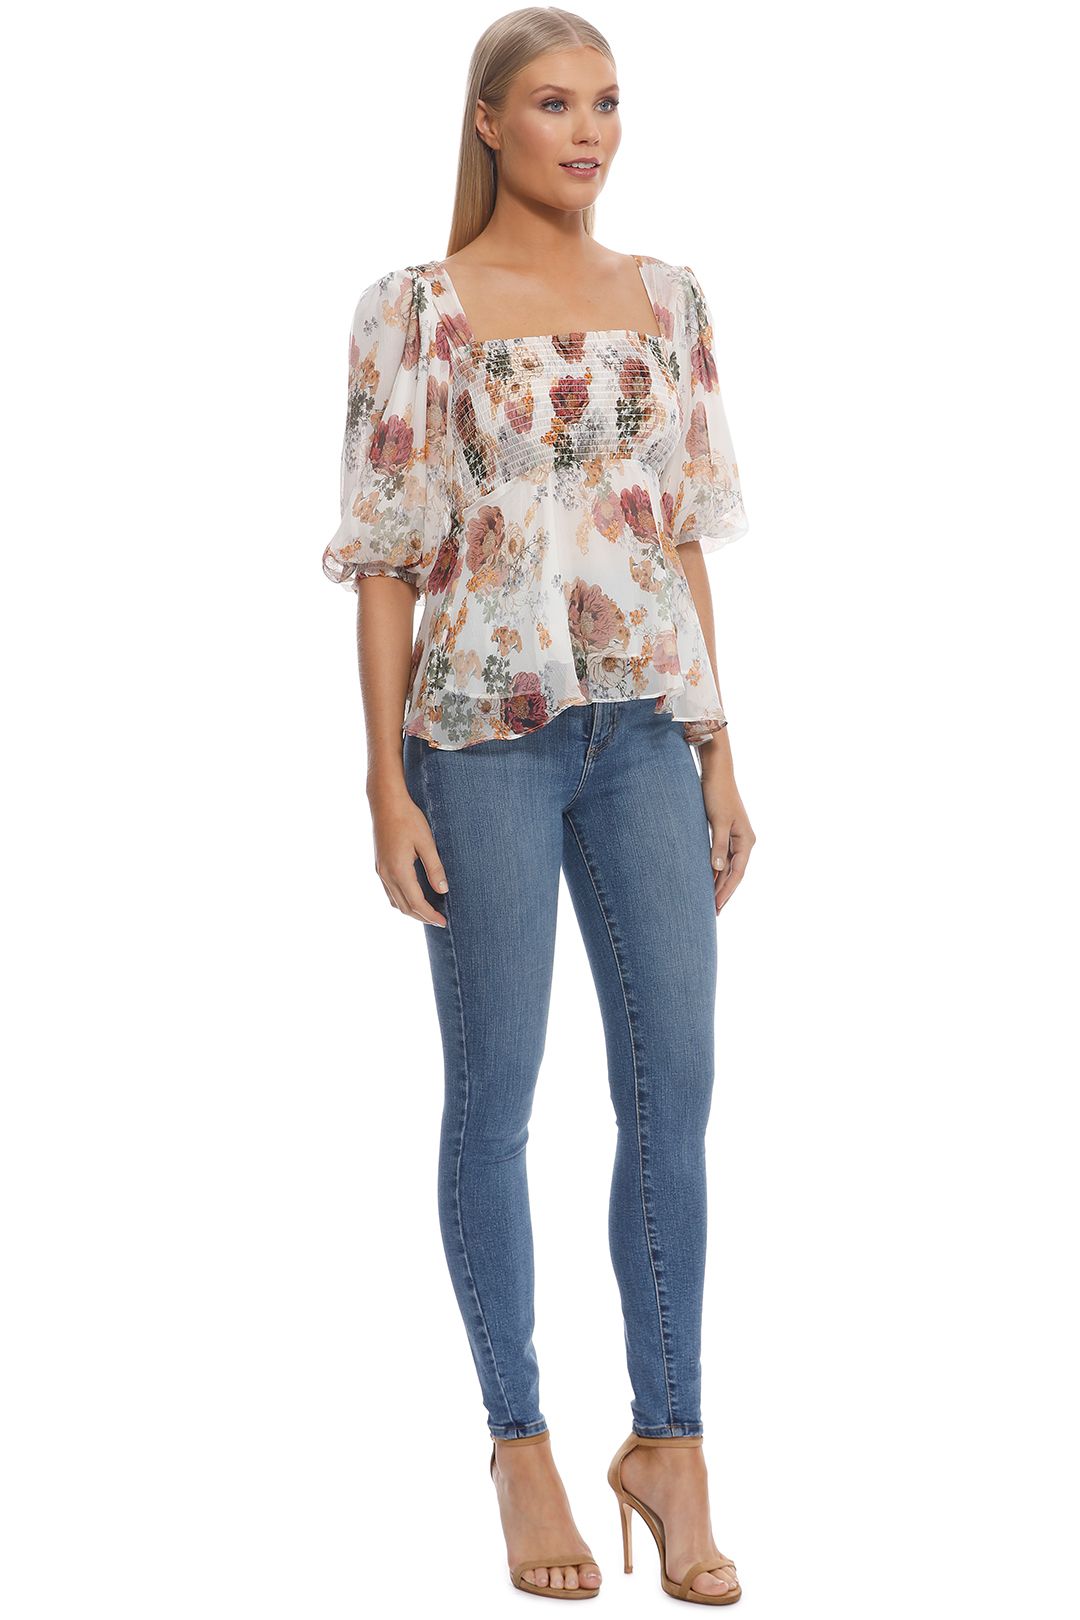 Nicholas The Label - Ivory Floral Square Neck Top - Ivory Floral - Side